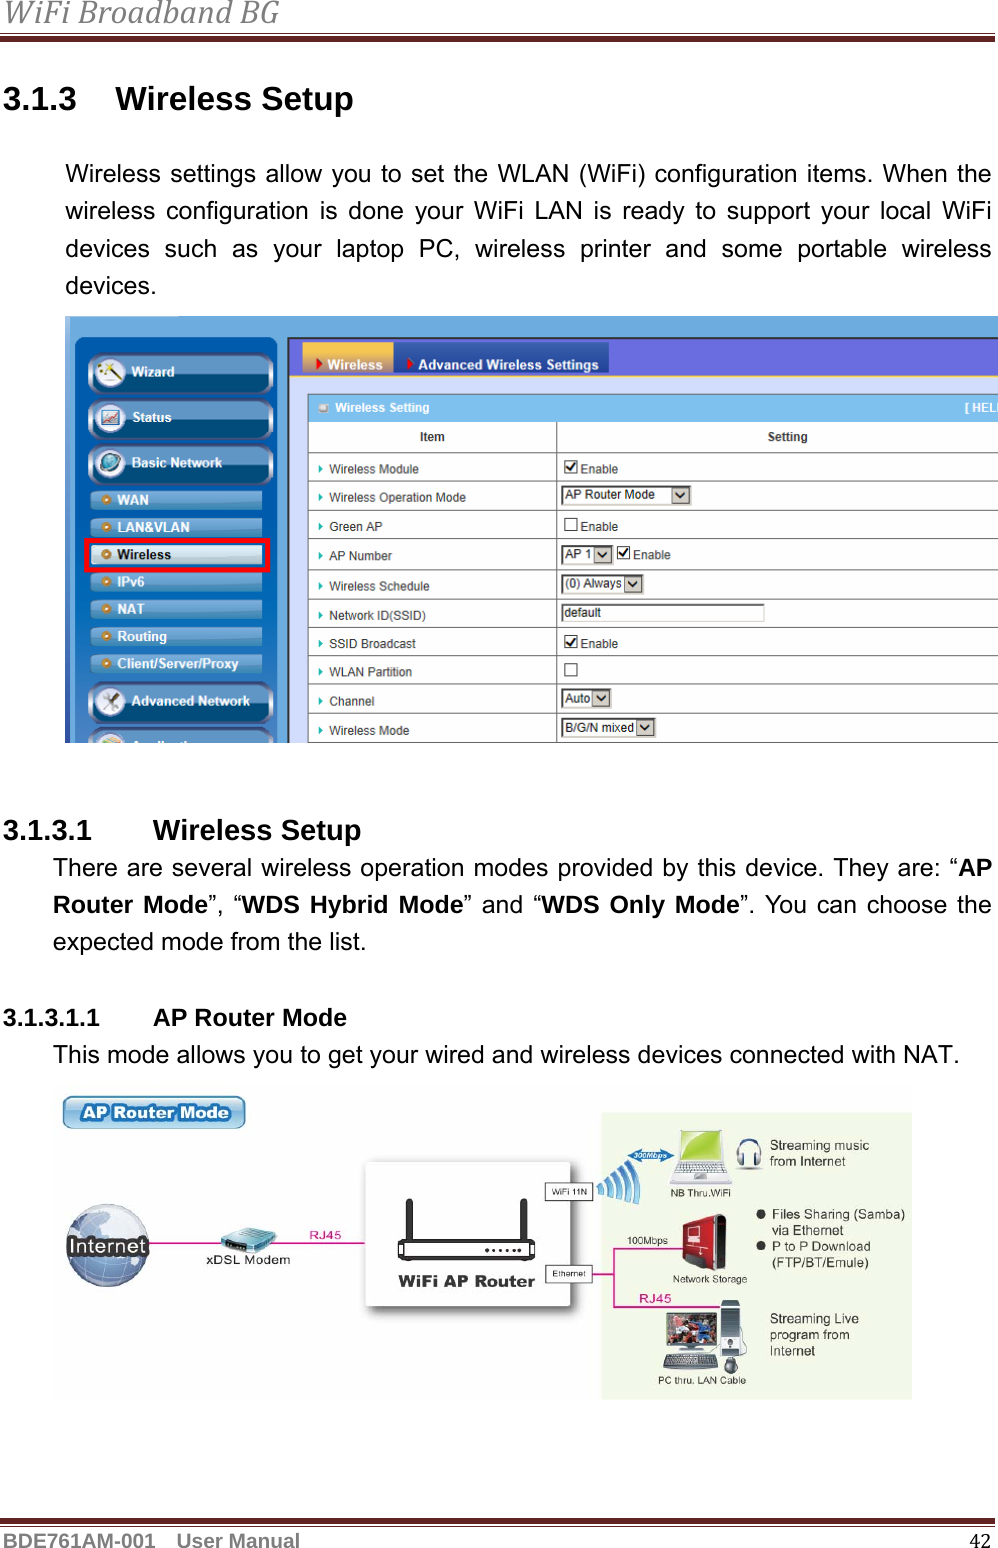 WiFiBroadbandBGBDE761AM-001  User Manual   423.1.3 Wireless Setup Wireless settings allow you to set the WLAN (WiFi) configuration items. When the wireless configuration is done your WiFi LAN is ready to support your local WiFi devices such as your laptop PC, wireless printer and some portable wireless devices.   3.1.3.1 Wireless Setup There are several wireless operation modes provided by this device. They are: “AP Router Mode”, “WDS Hybrid Mode” and “WDS Only Mode”. You can choose the expected mode from the list.  3.1.3.1.1  AP Router Mode This mode allows you to get your wired and wireless devices connected with NAT.  